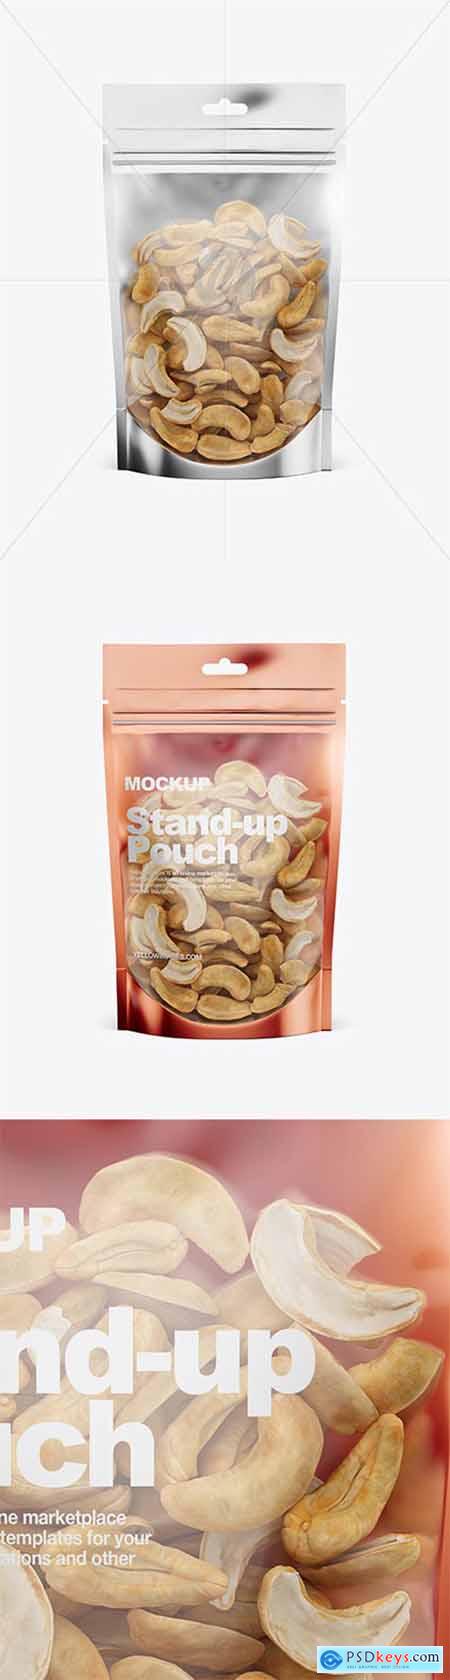 Glossy Transparent Stand-Up Pouch W- Cashew Nuts Mockup - Front View 32894